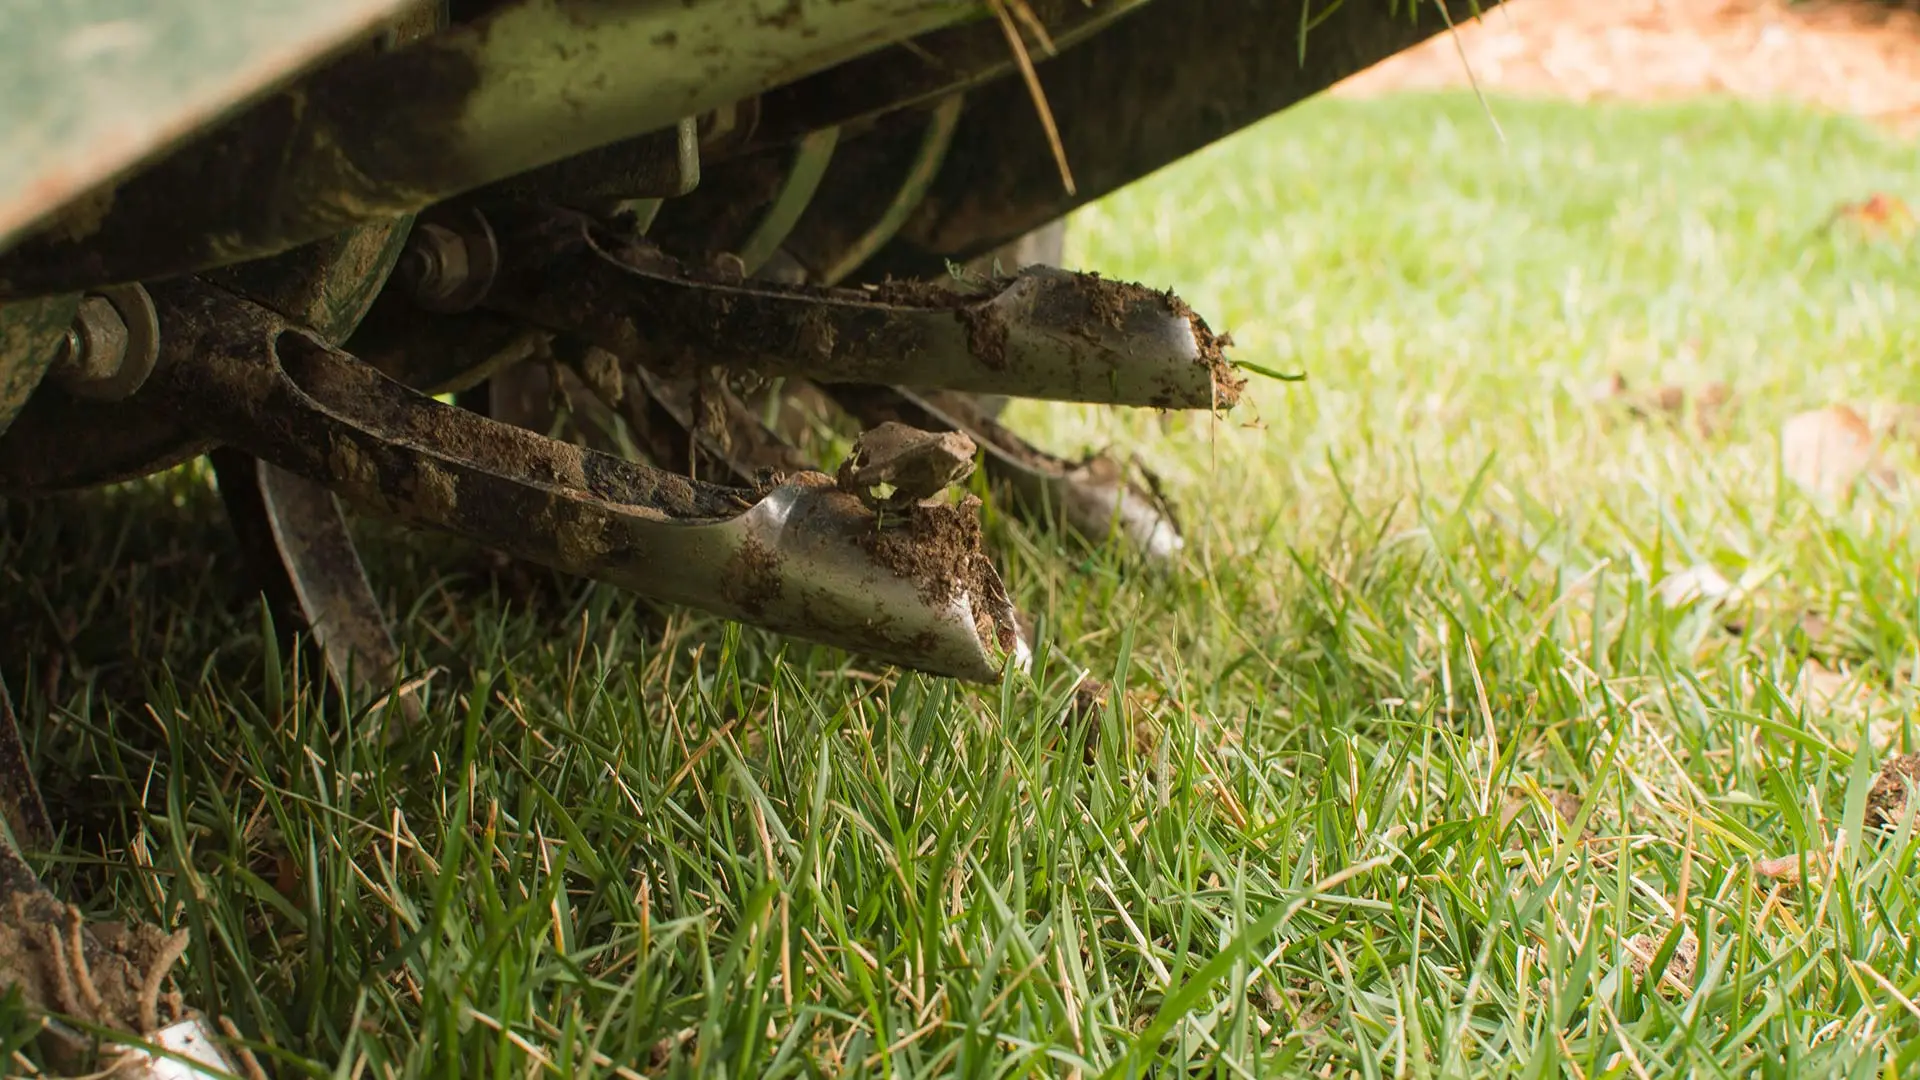 A close up of an aeration machine at work strengthening a lawn near Lady Lake, FL.